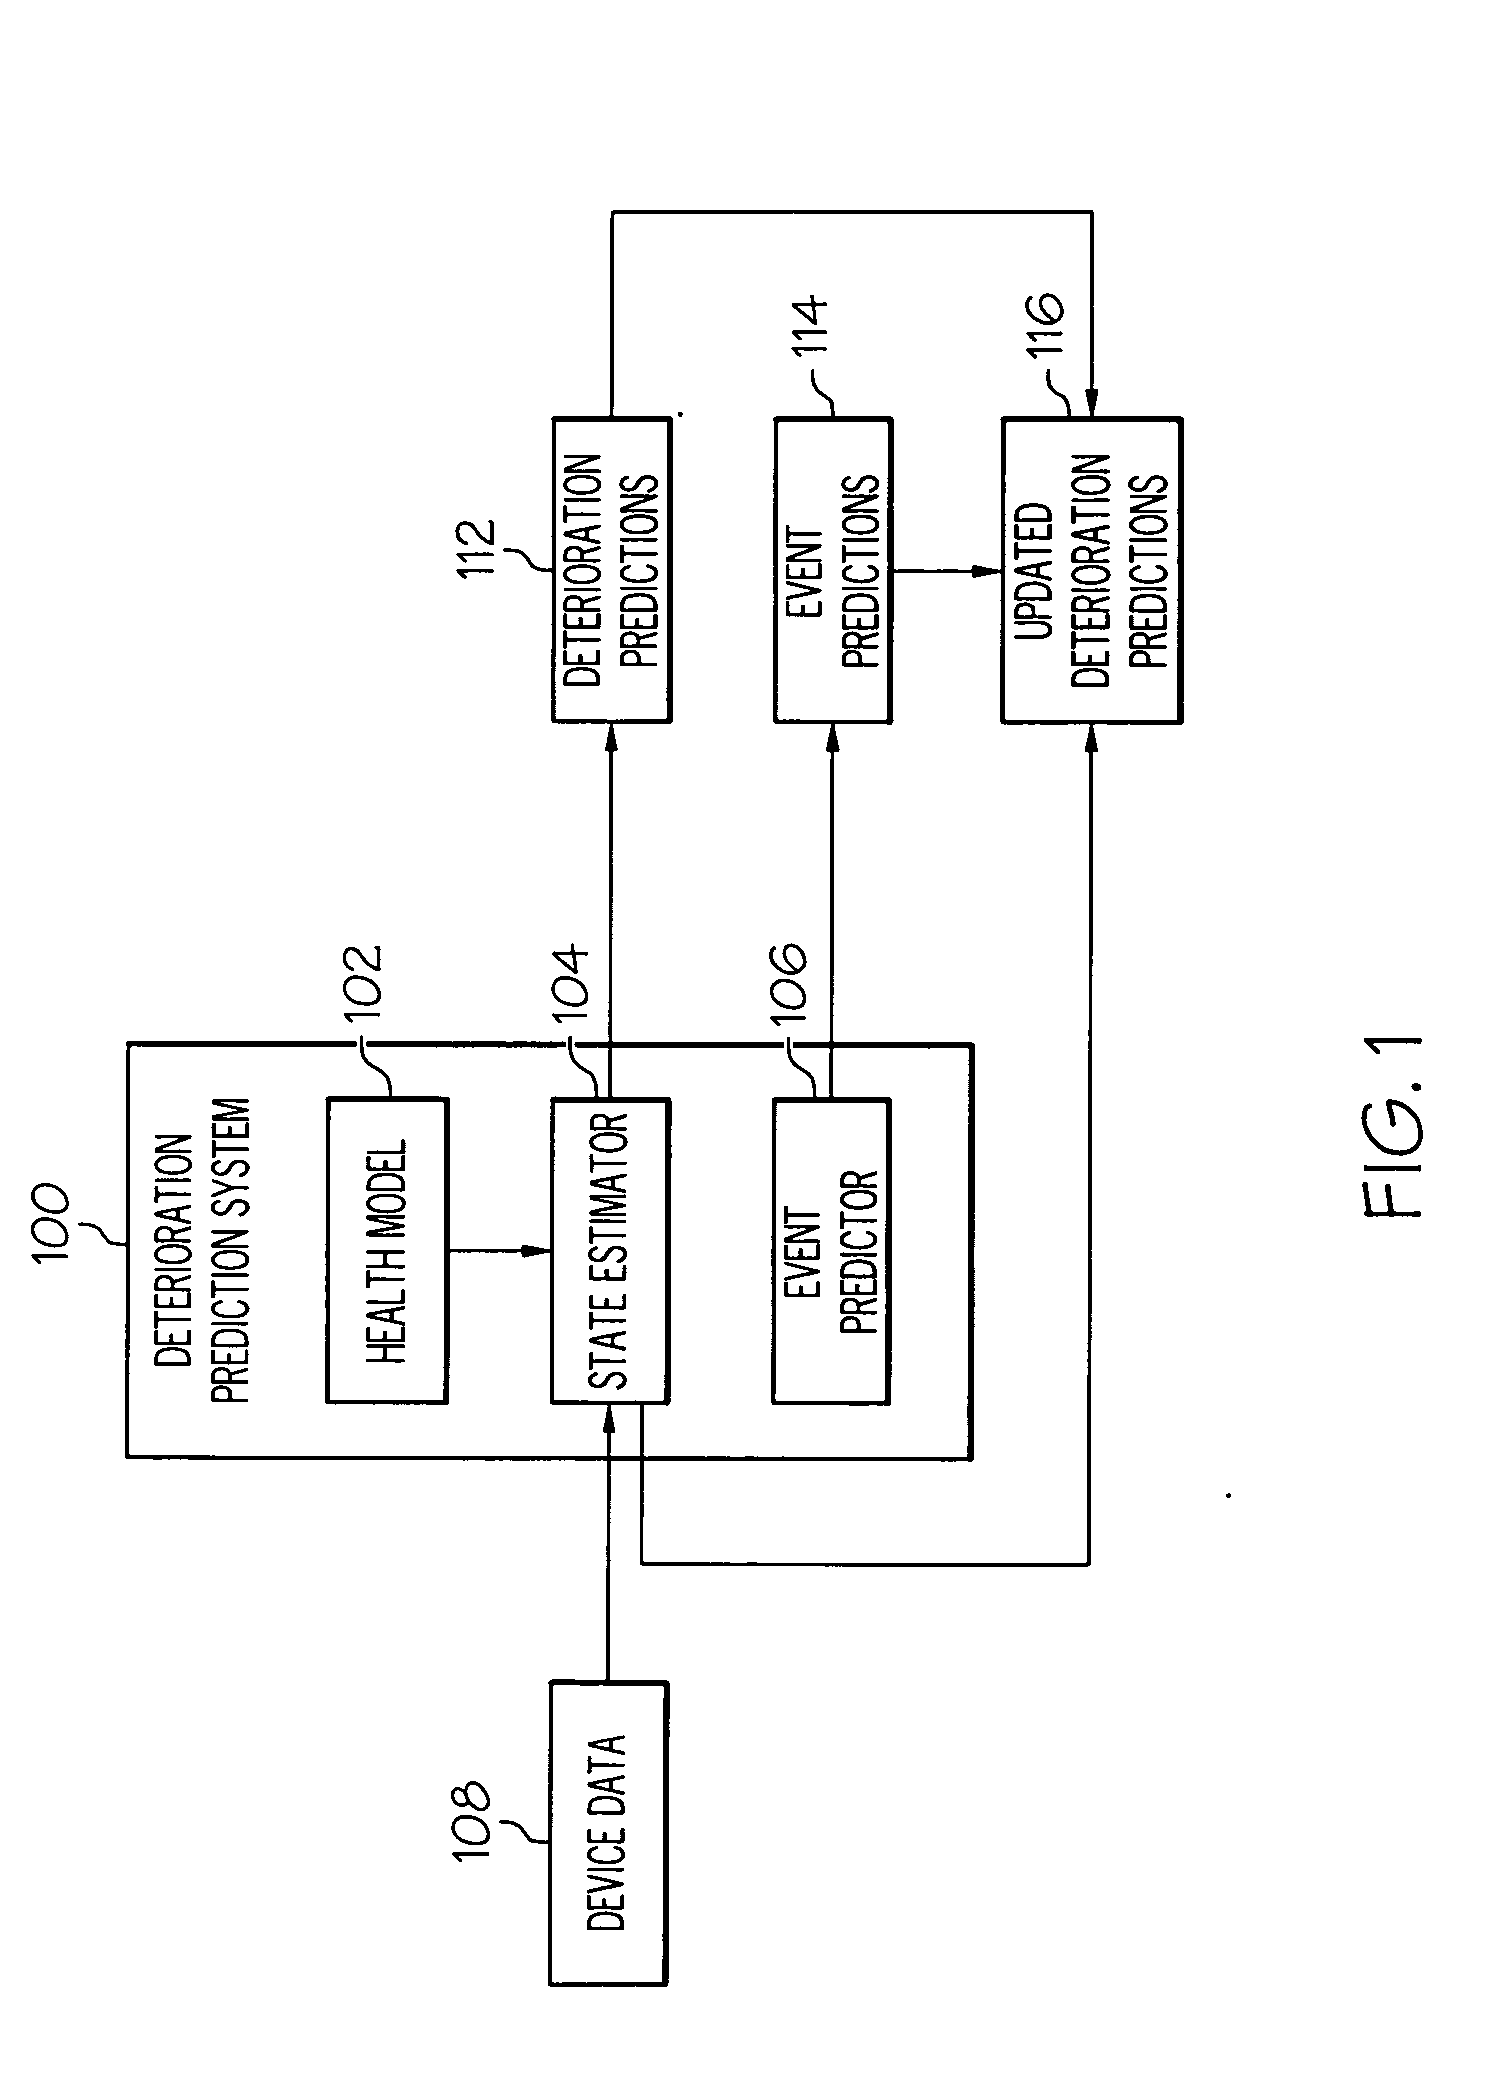 System and method for predicting system events and deterioration